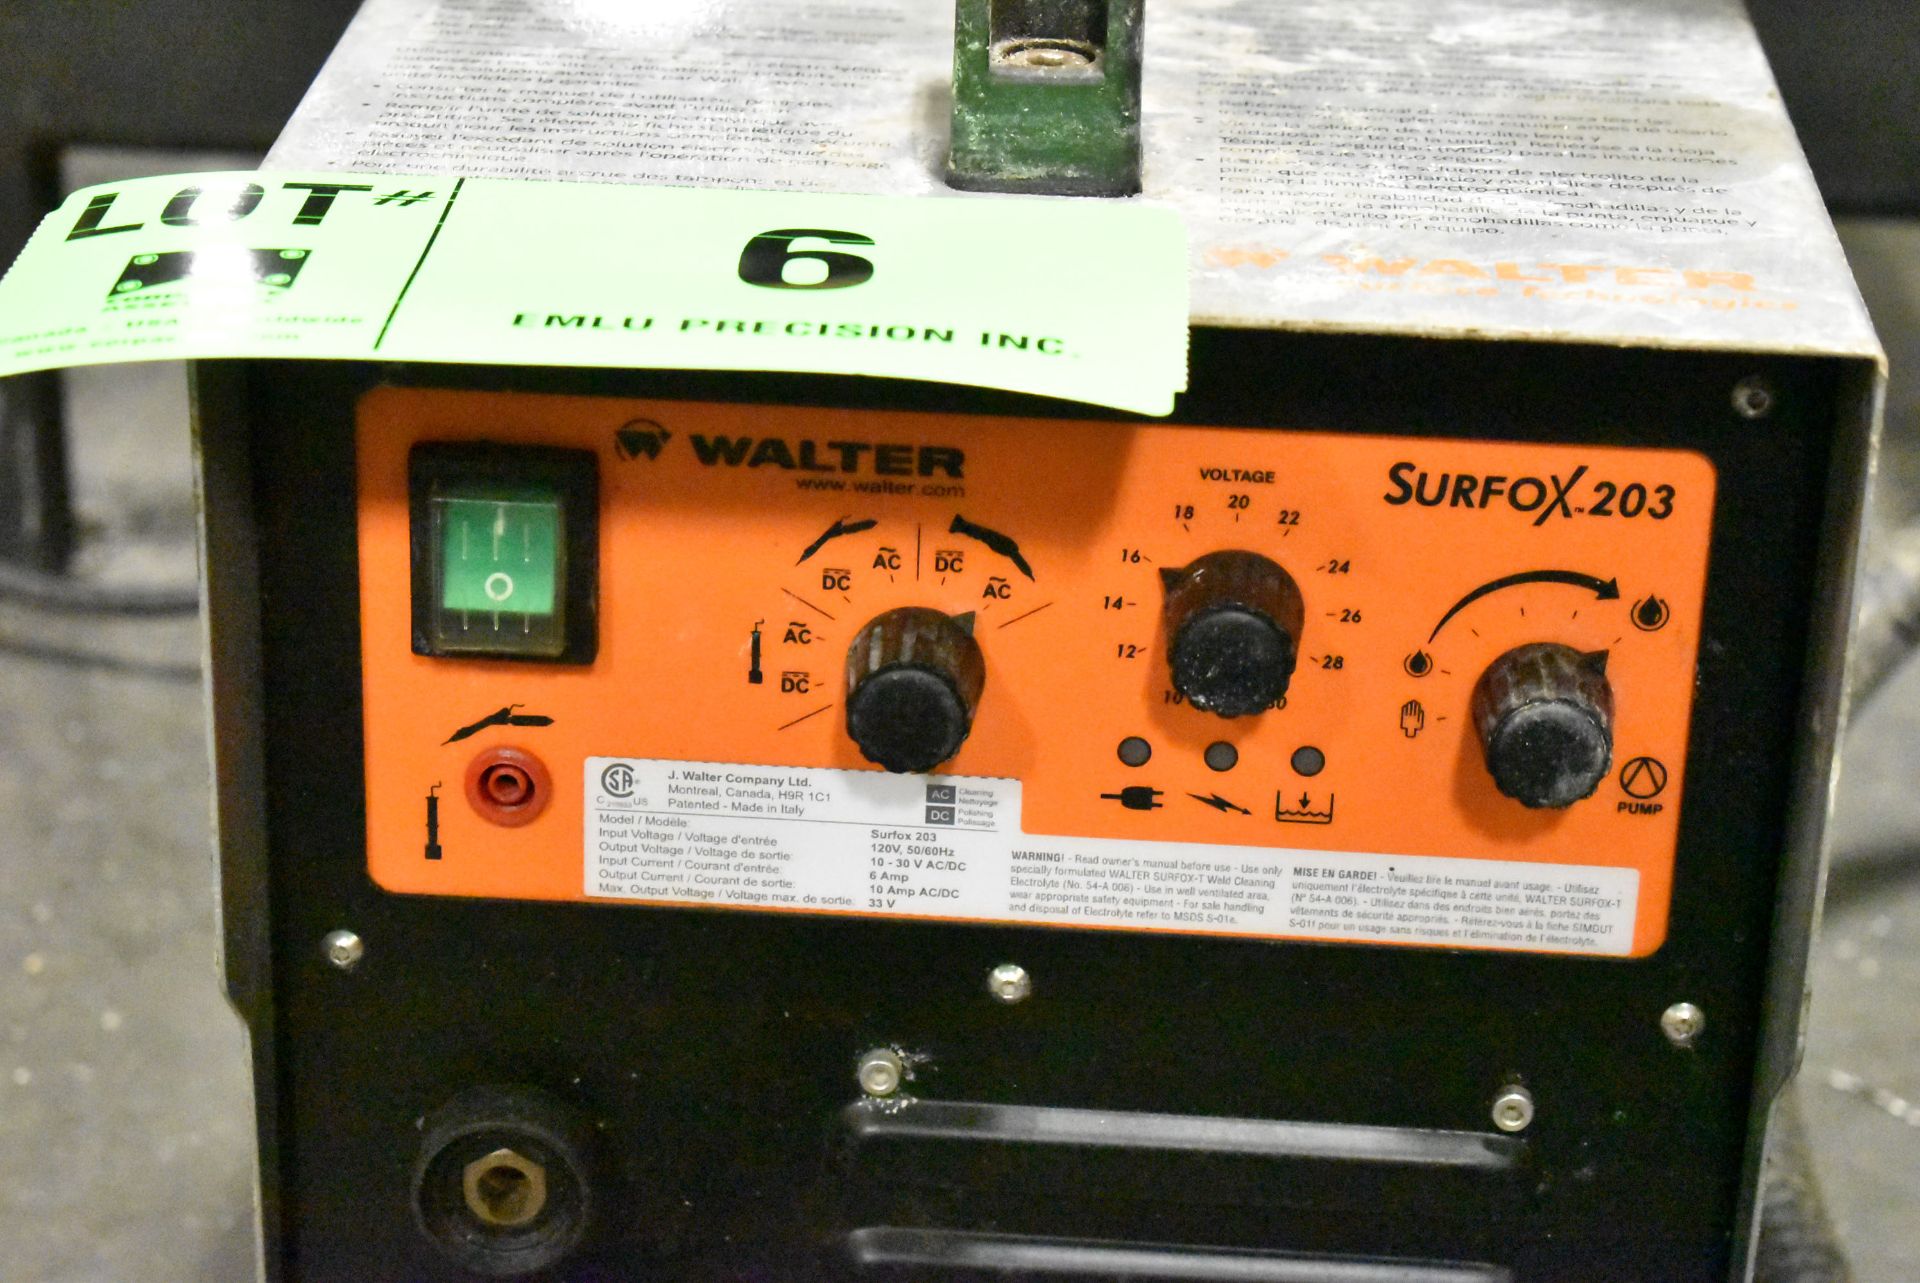 WALTER SURFOX 203 STAINLESS STEEL WELD CLEANING SYSTEM, S/N 23.1387 - Image 2 of 4